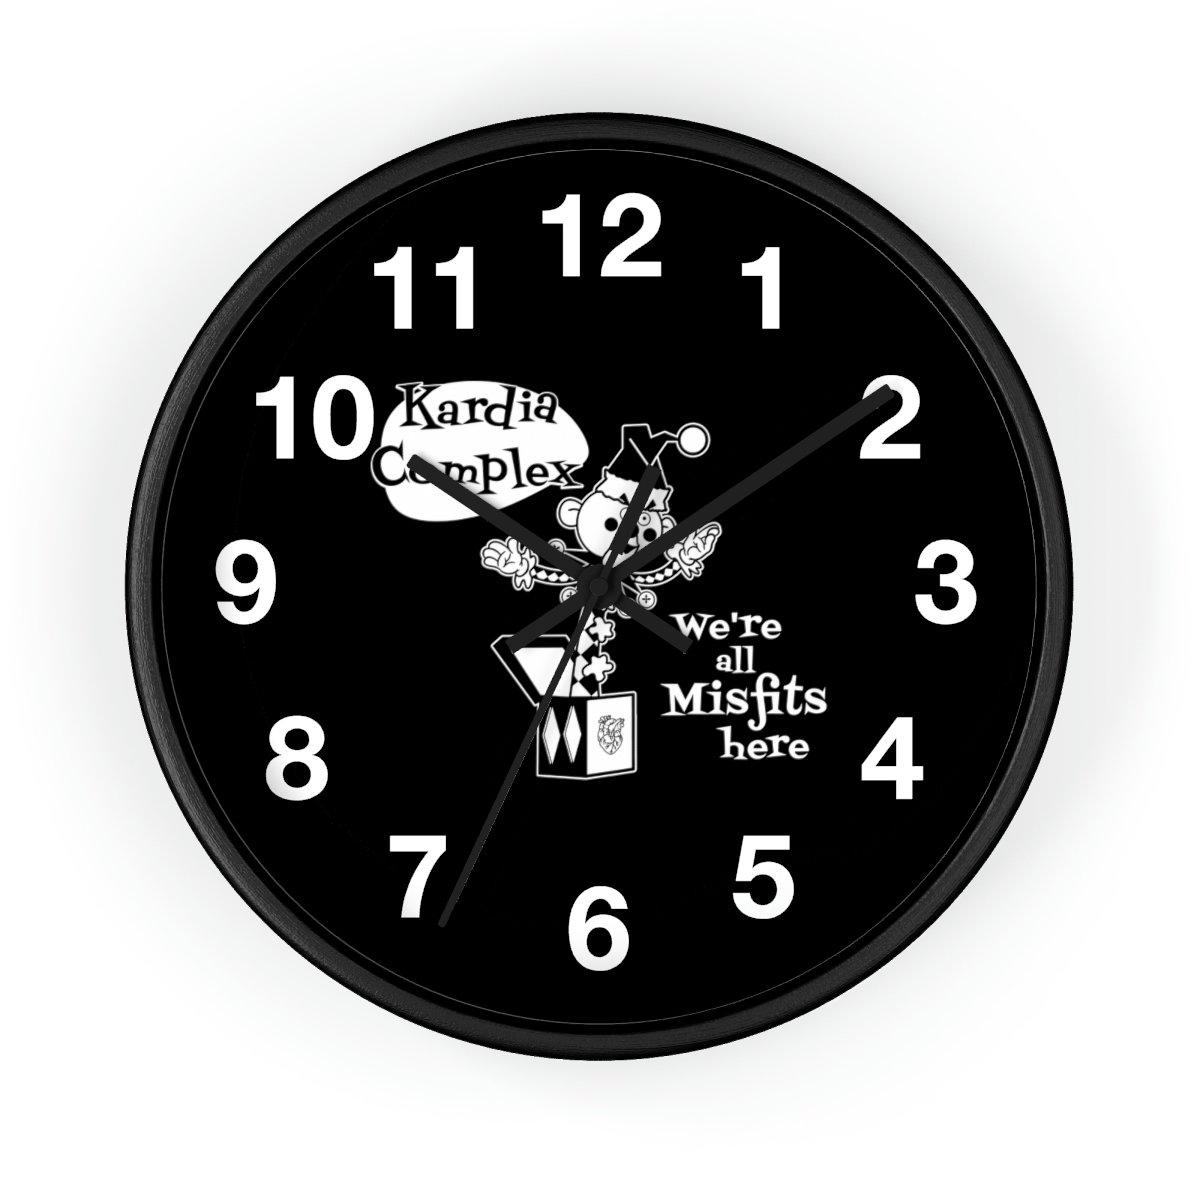 Kardia Complex – We’re All Misfits Here Wall clock